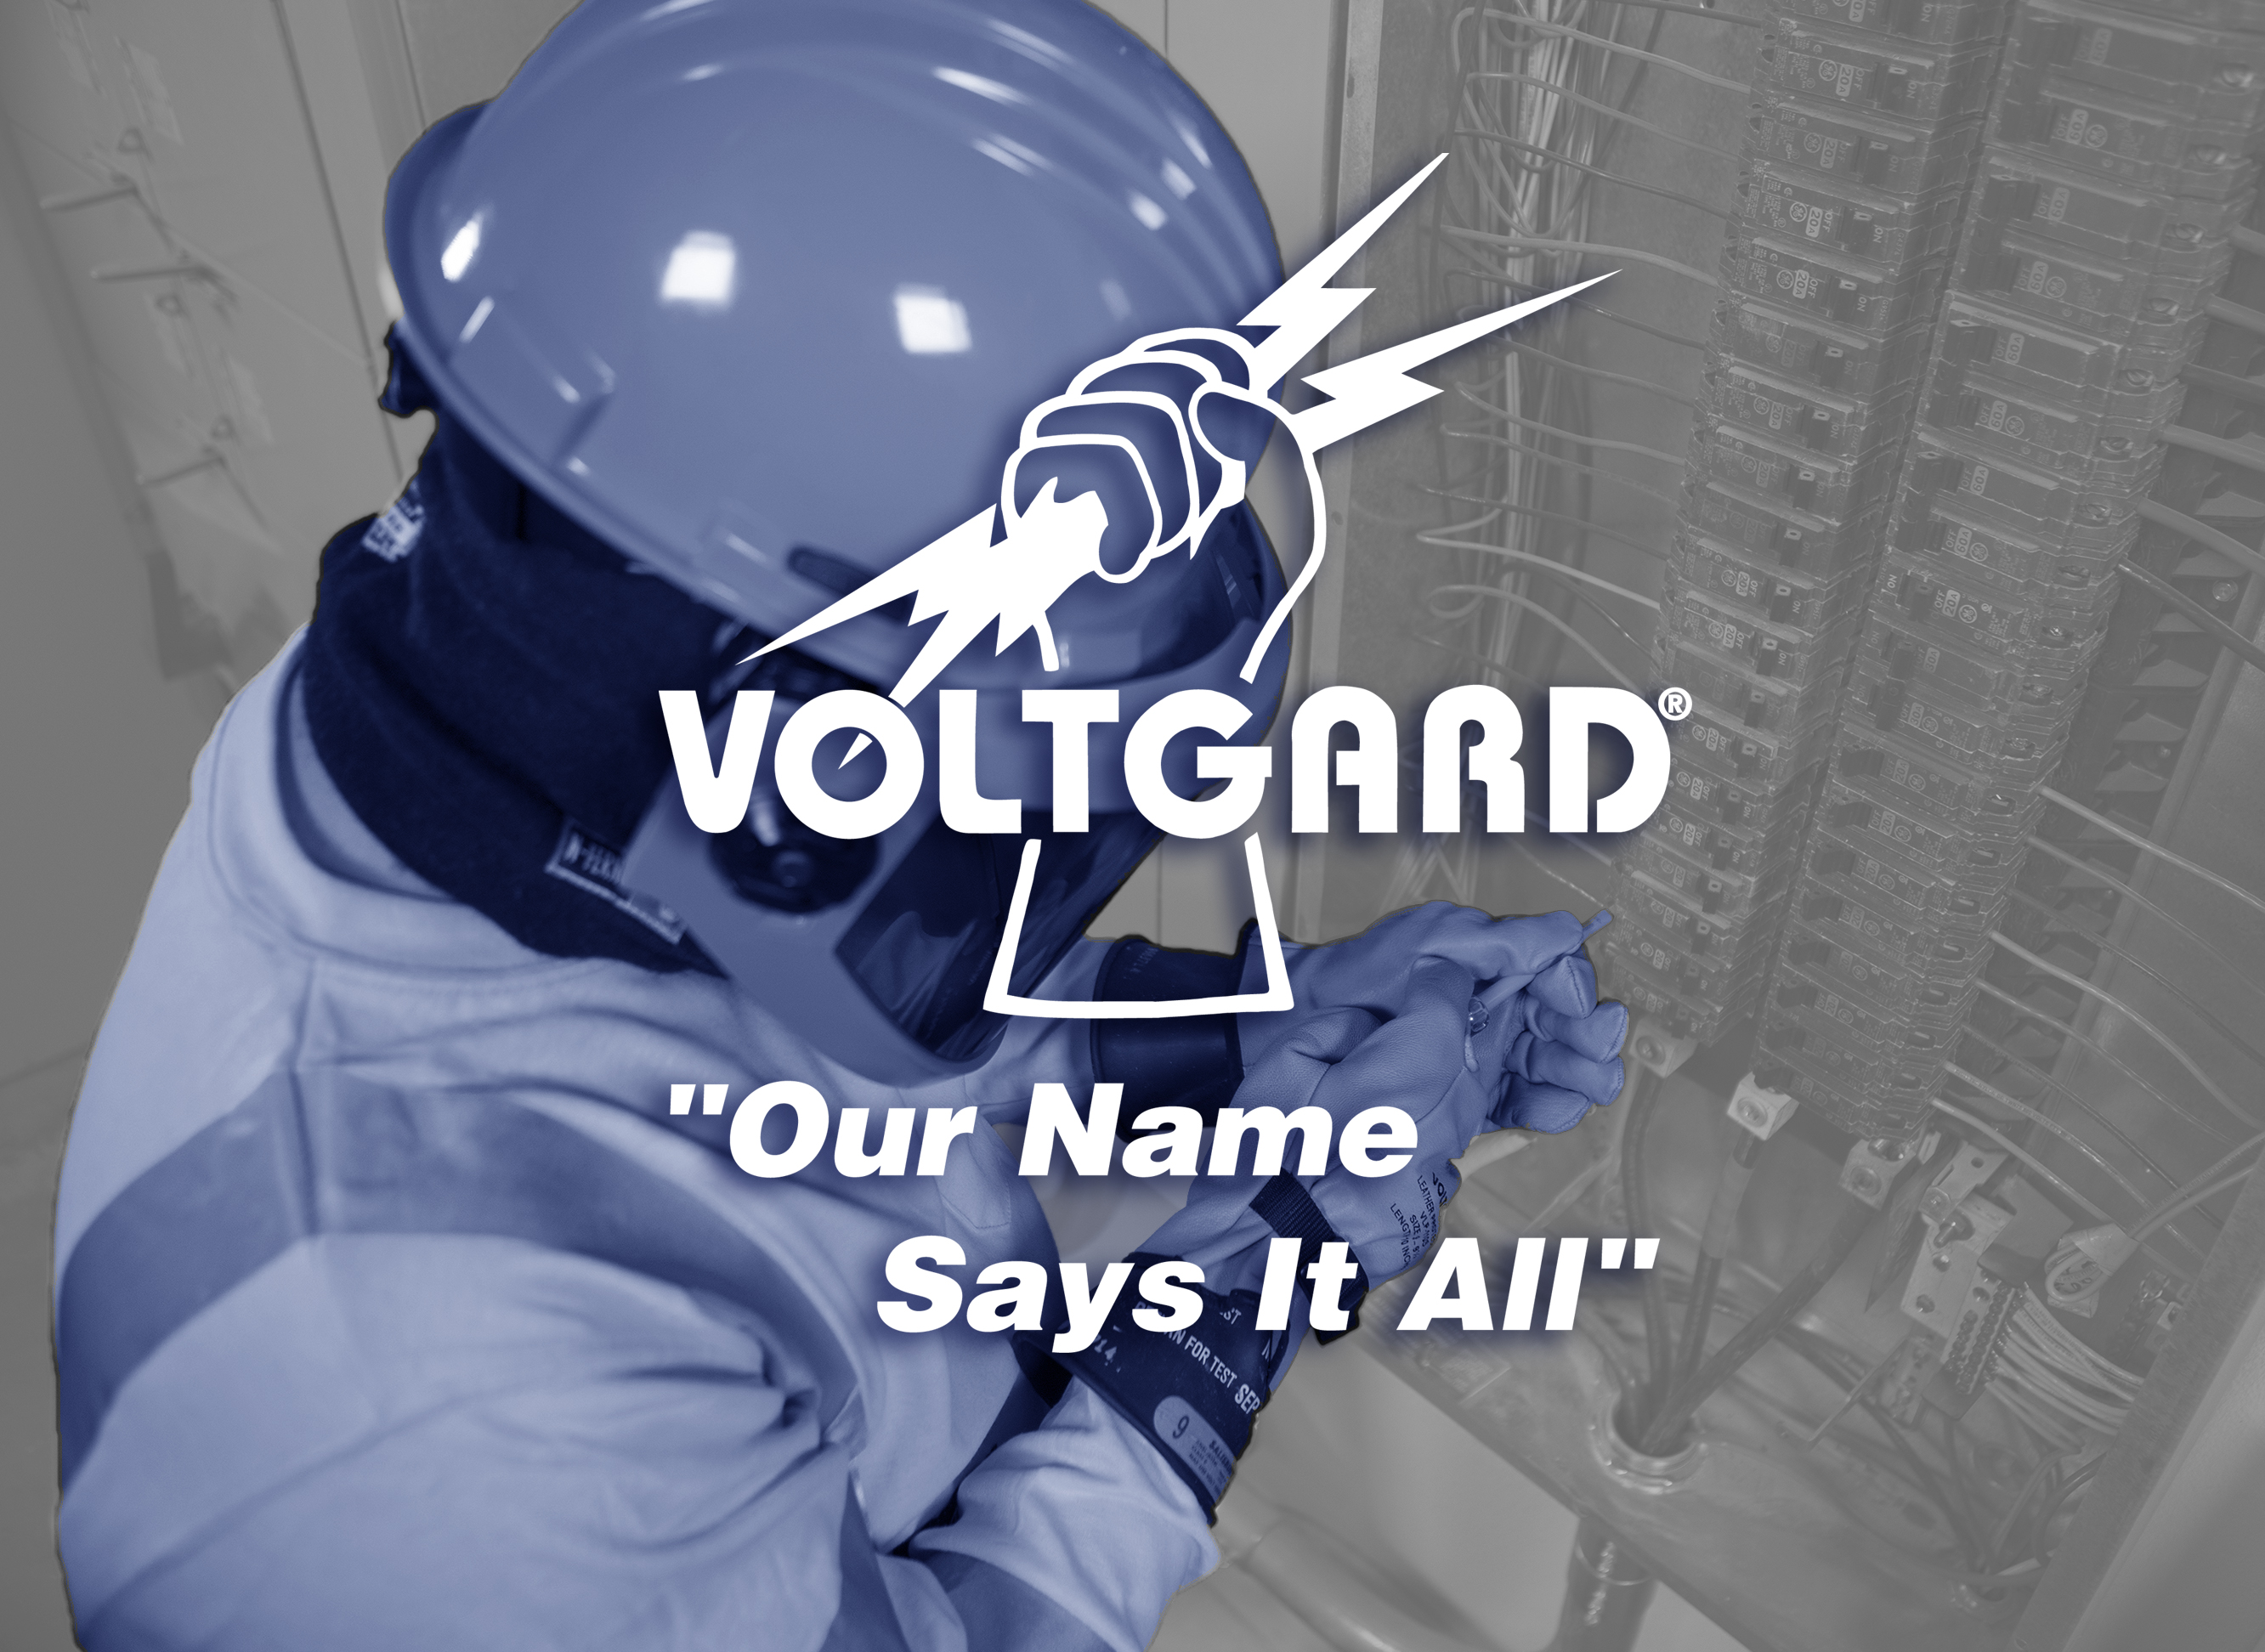 Electrical Worker Wearing Gloves Working On A Panel With Voltgard Logo